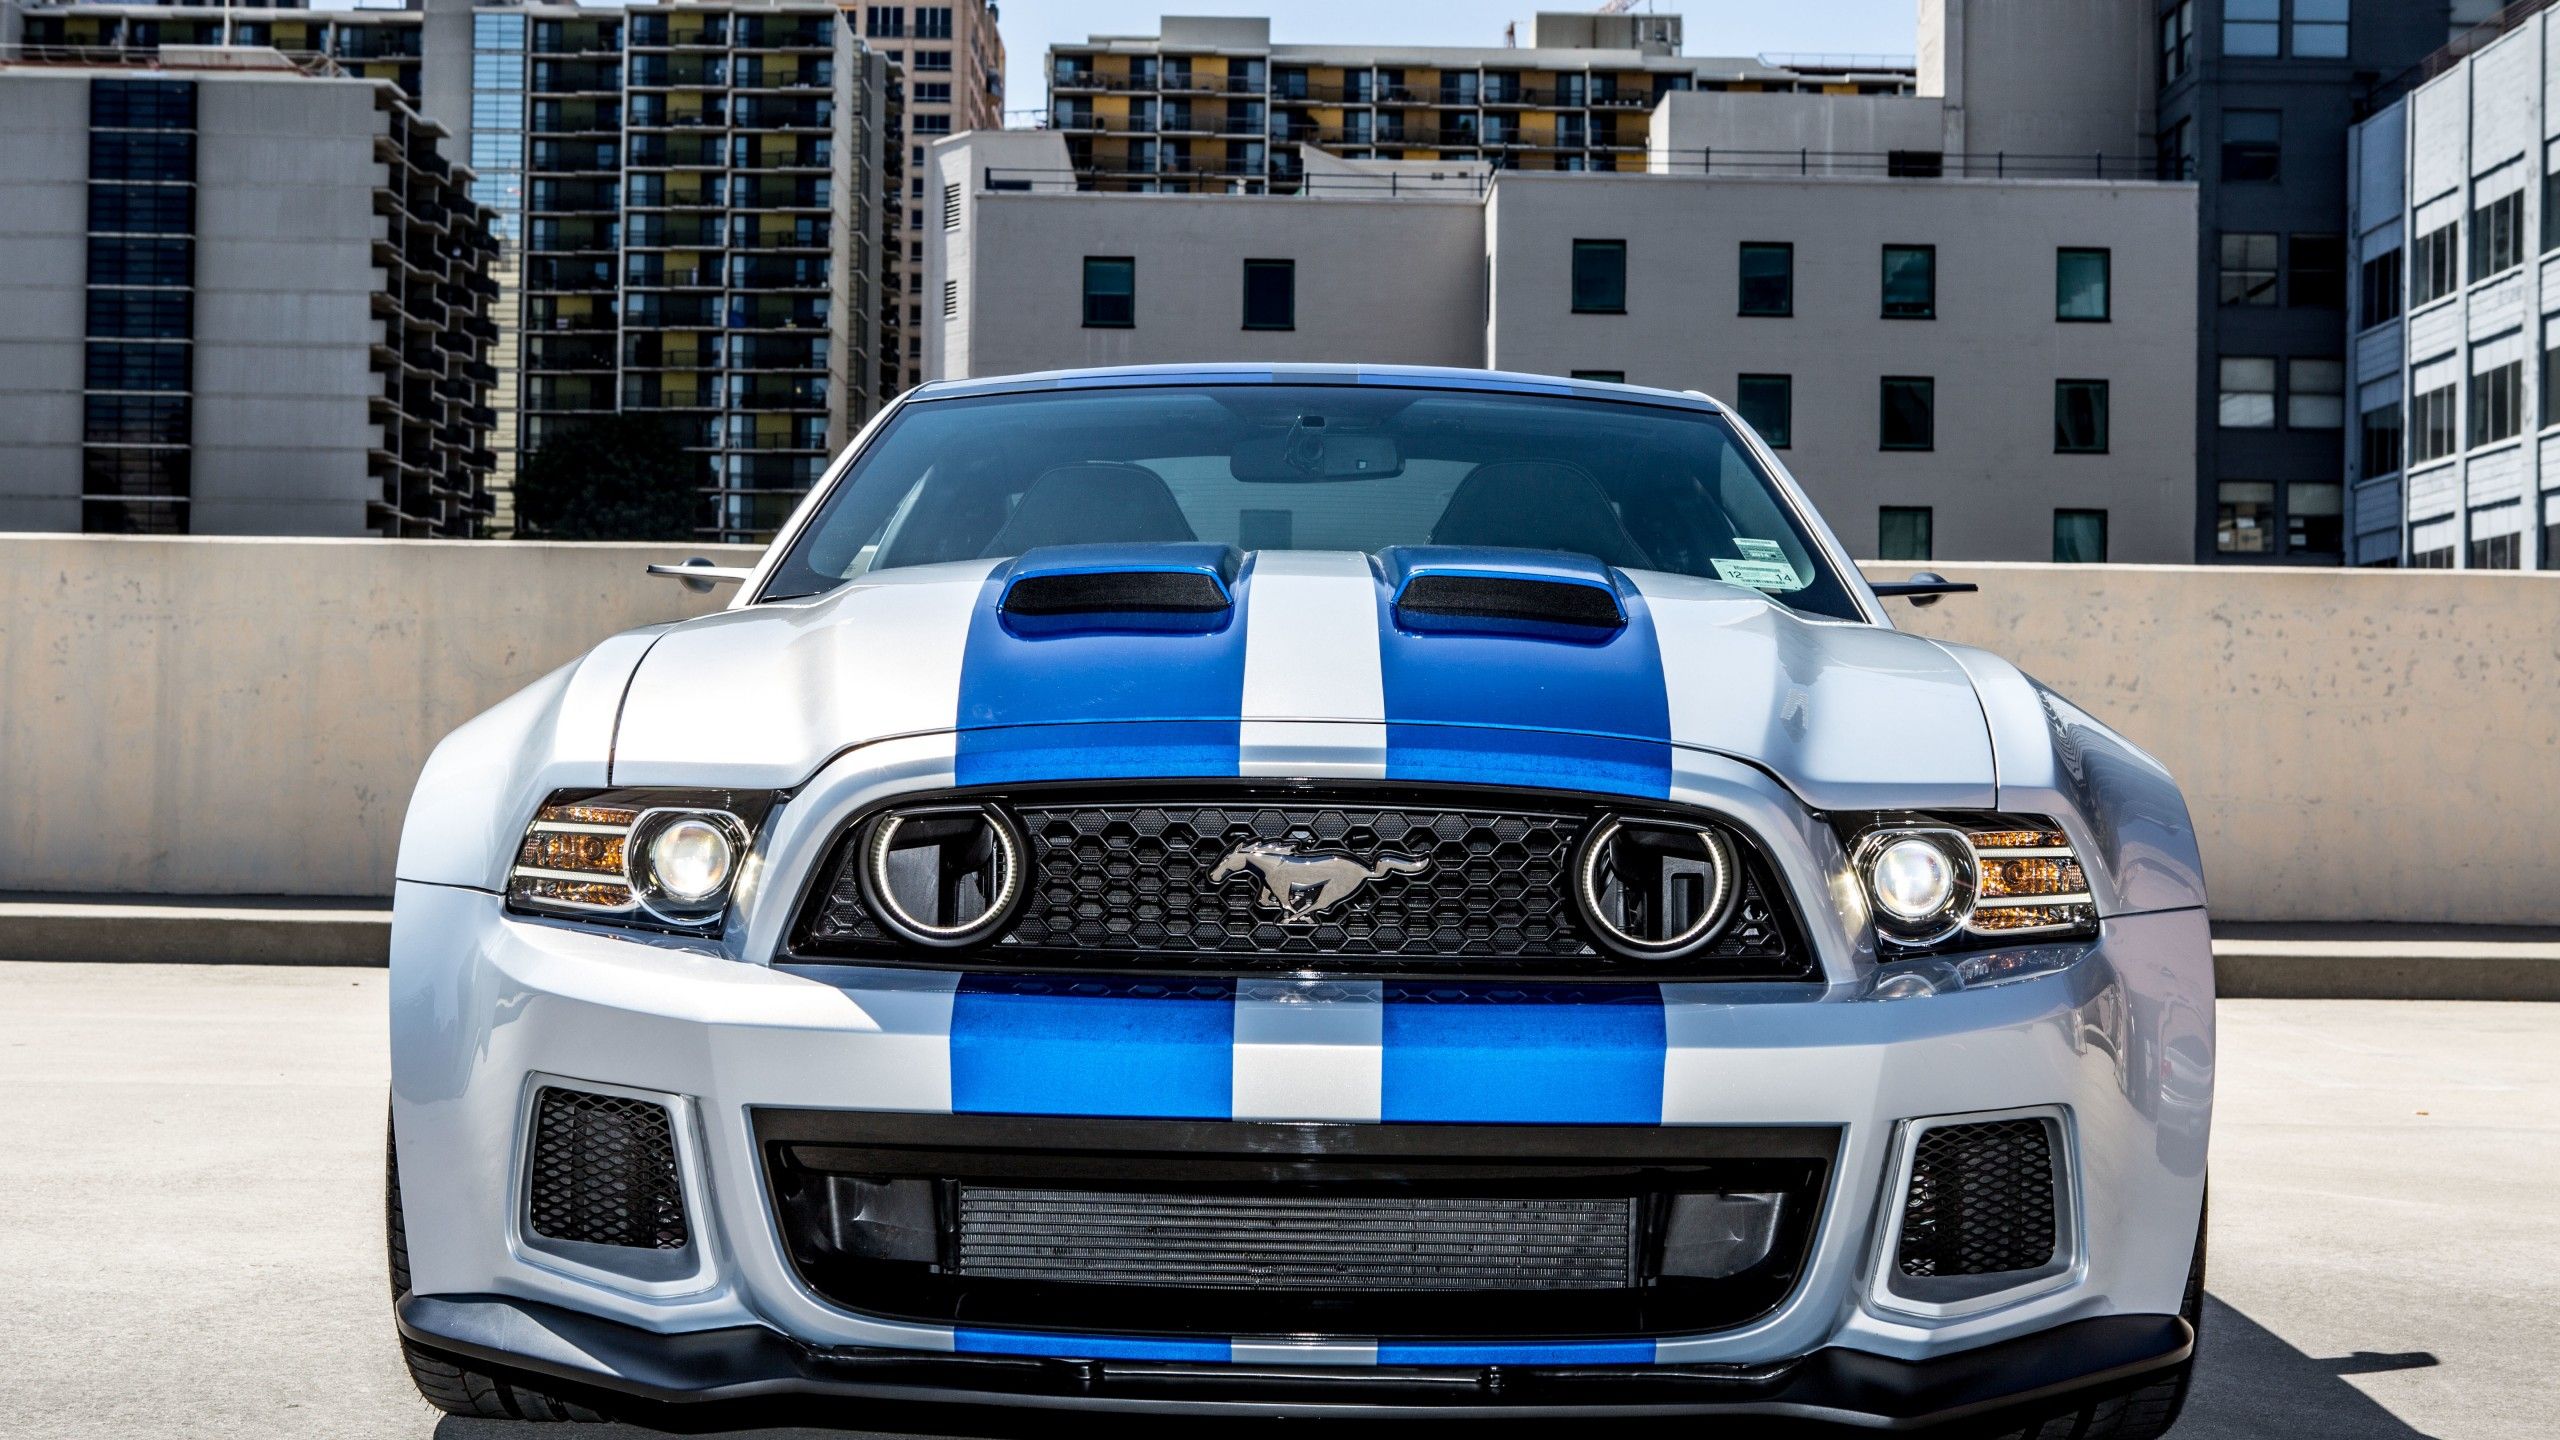 Wallpaper Ford Mustang GT, HD, 5K, Automotive,. Wallpaper for iPhone, Android, Mobile and Desktop